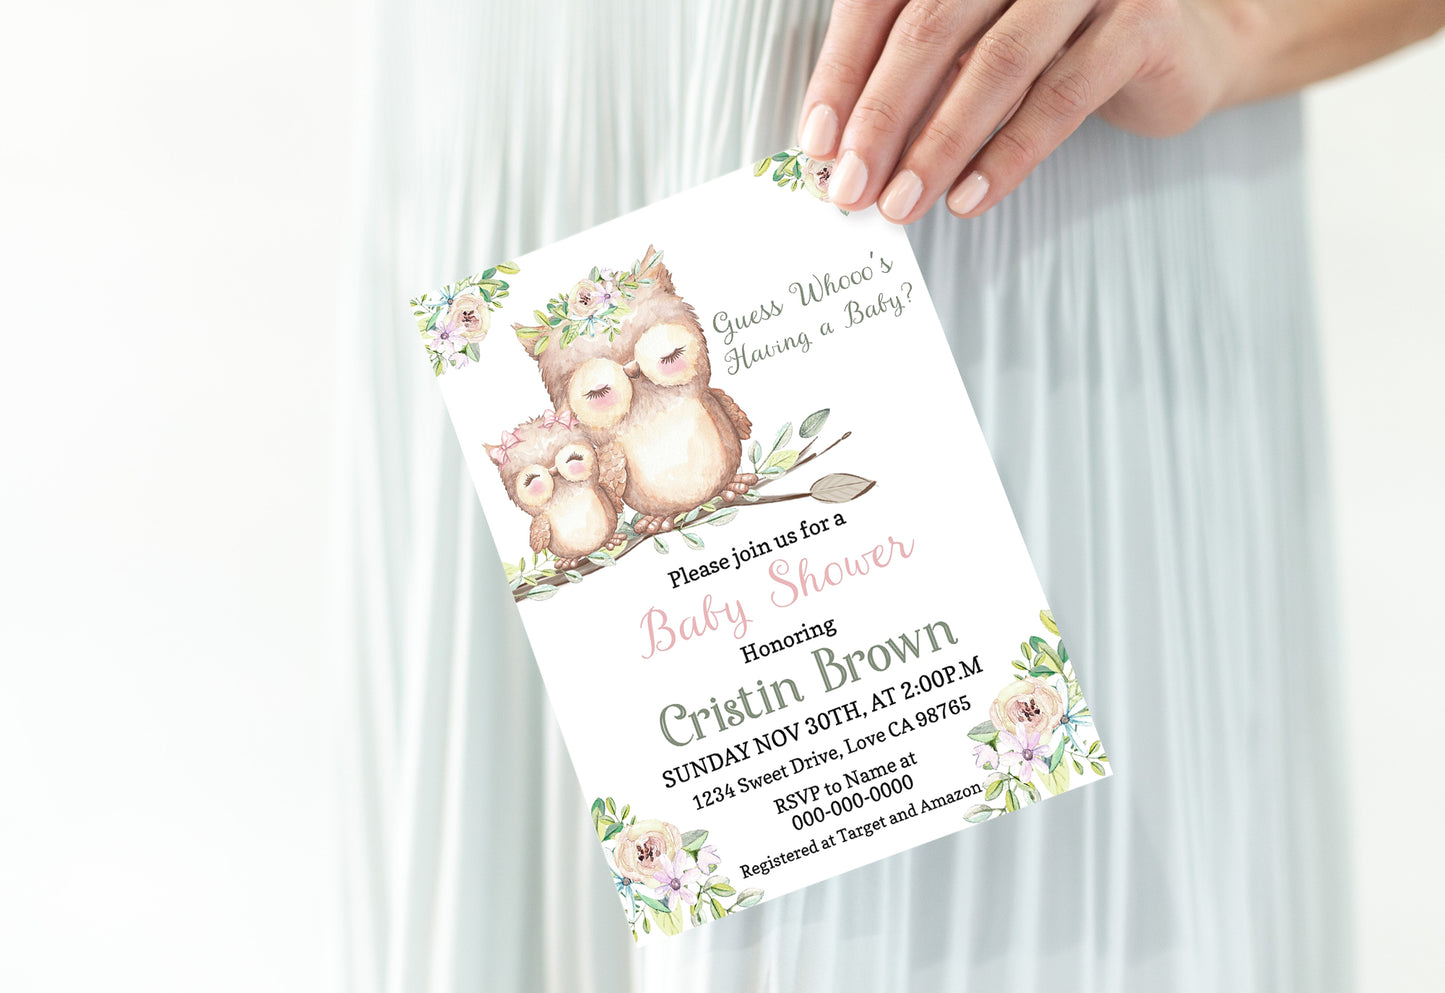 Guess Whoo's Having A Baby Invitation | Editable Owl Girl Baby Shower Invite - 78A